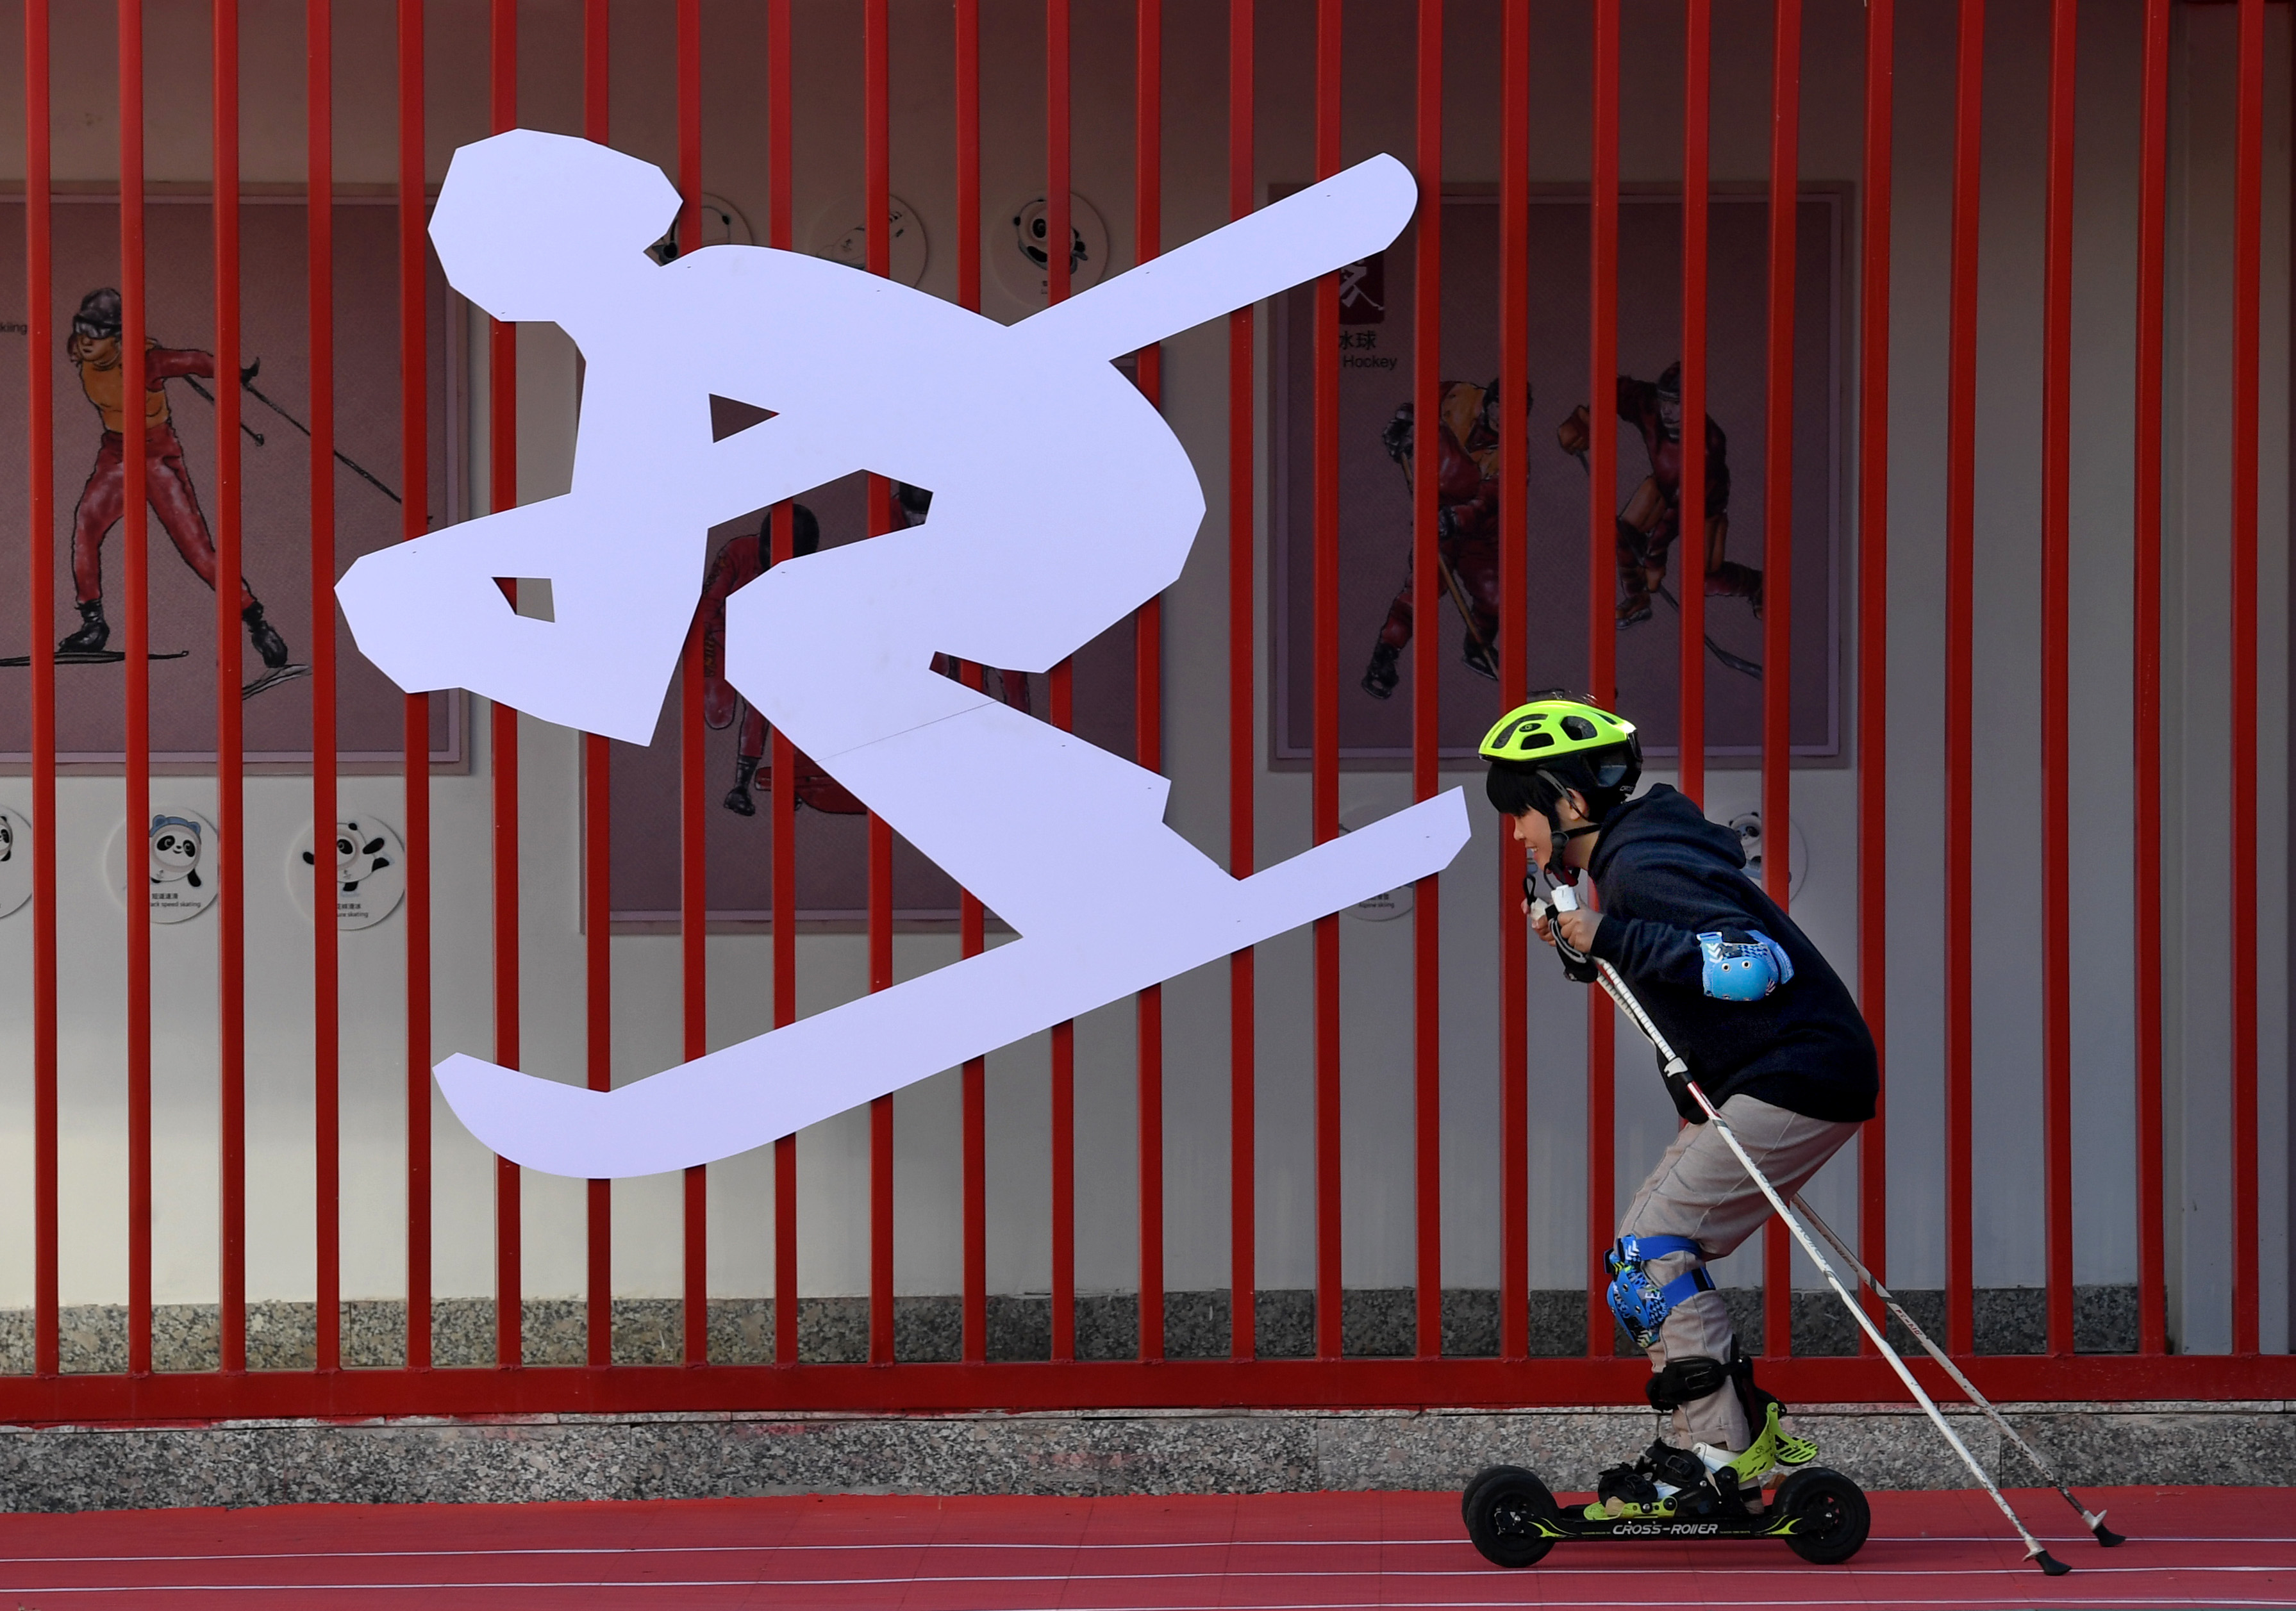 Li Yinuo, an athlete of cross-country skiing team, trains on the campus of Luanchuan County Special Education School in Luanchuan County, central China's Henan Province, Nov. 18, 2021.